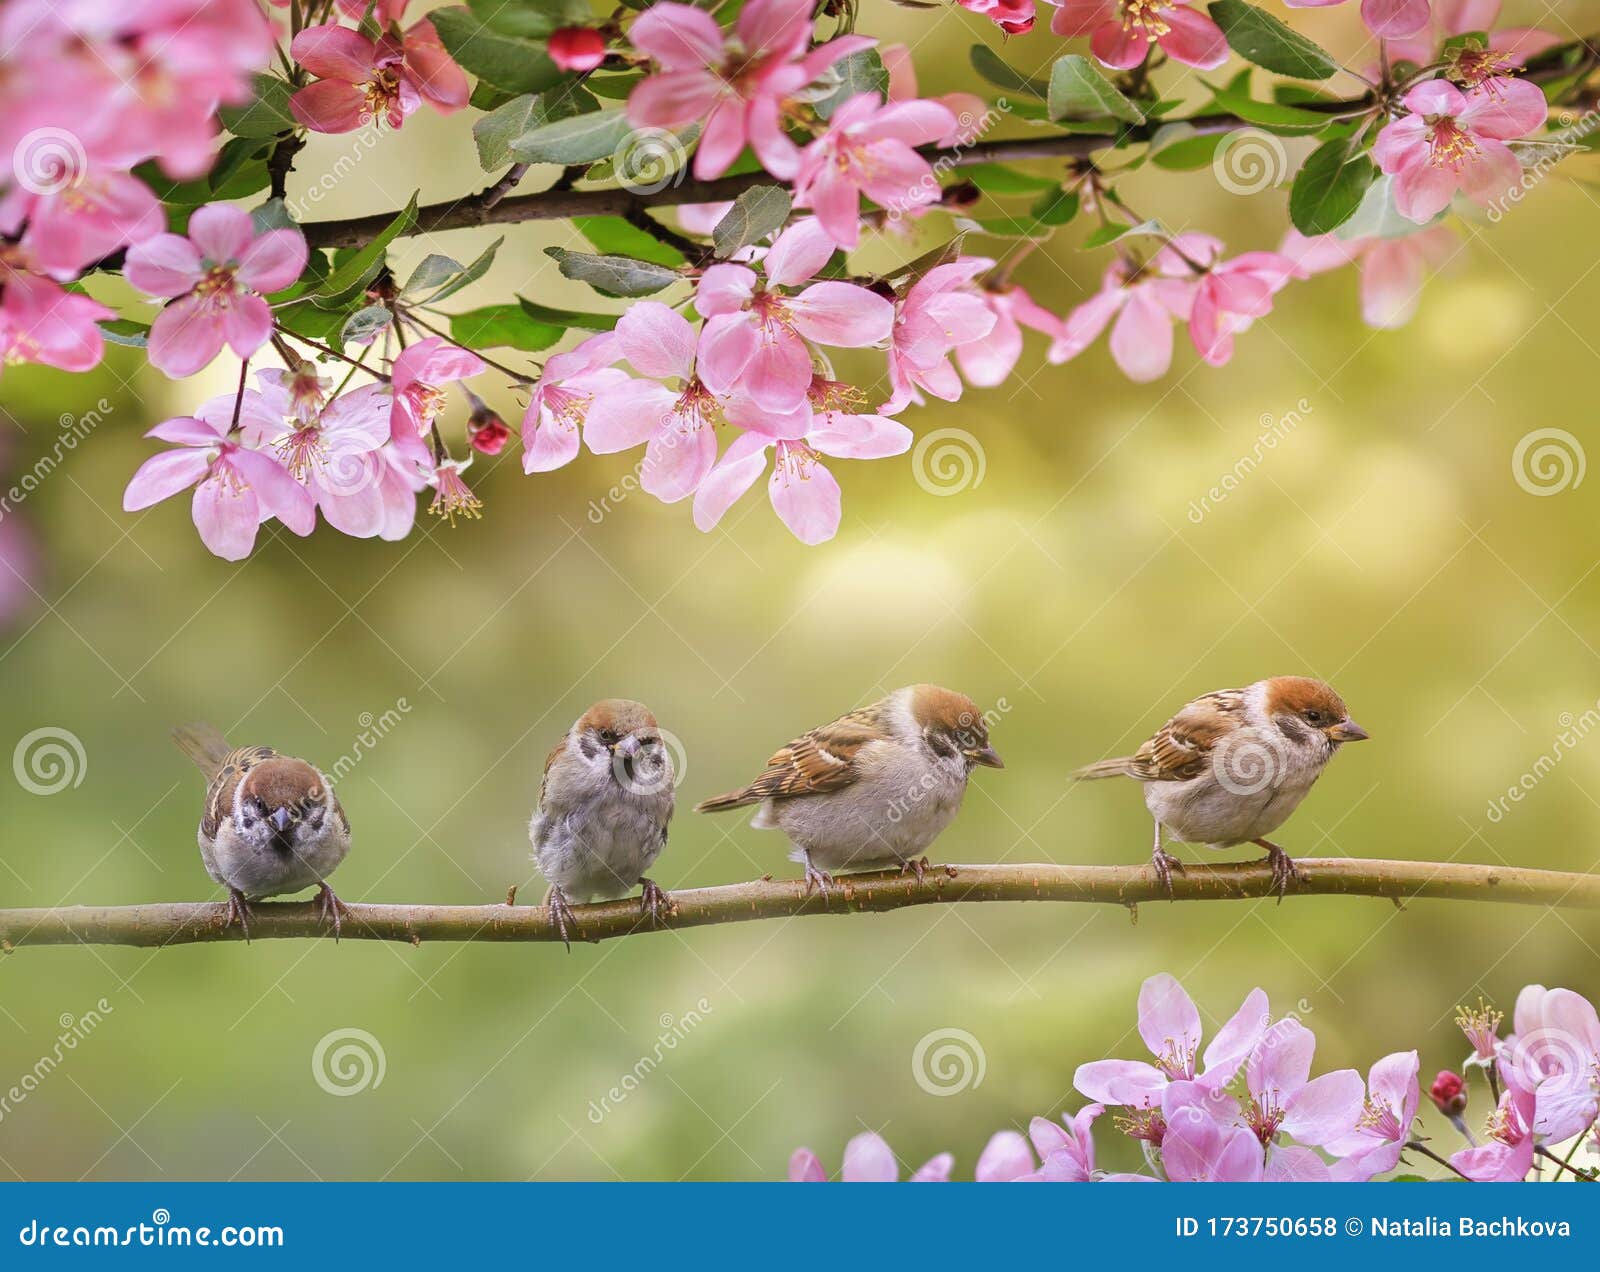 Background with Birds, Sitting on Branches with Pink Apple Blossom in